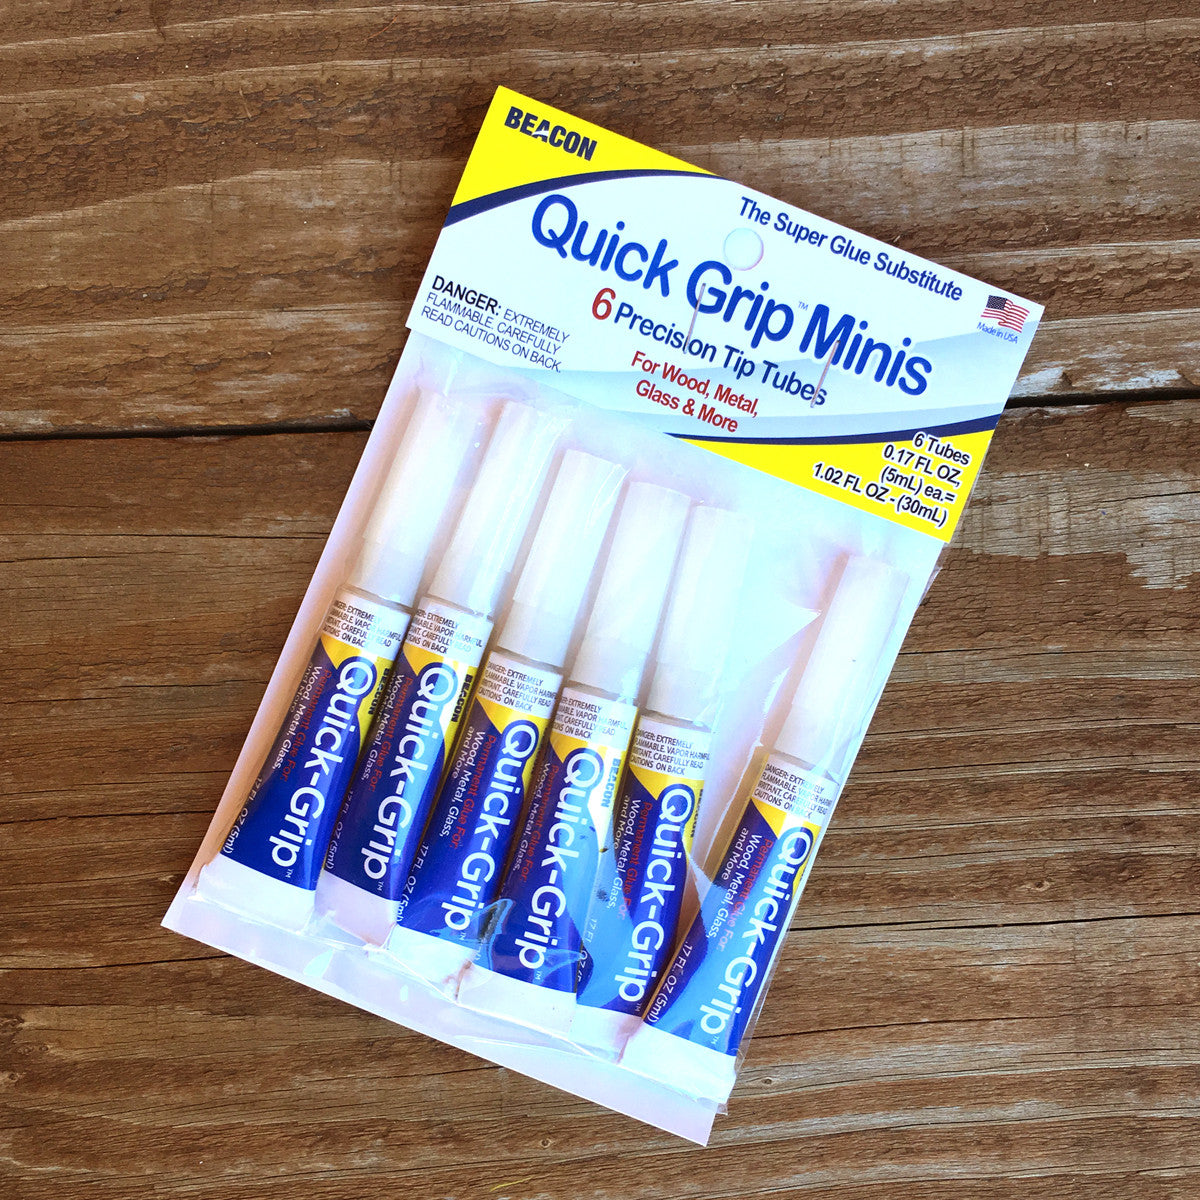 Quick Grip Glue: This one is quick-bond, supposed to adhere  anything-to-anything and be water and weatherproof. Going to try this on…